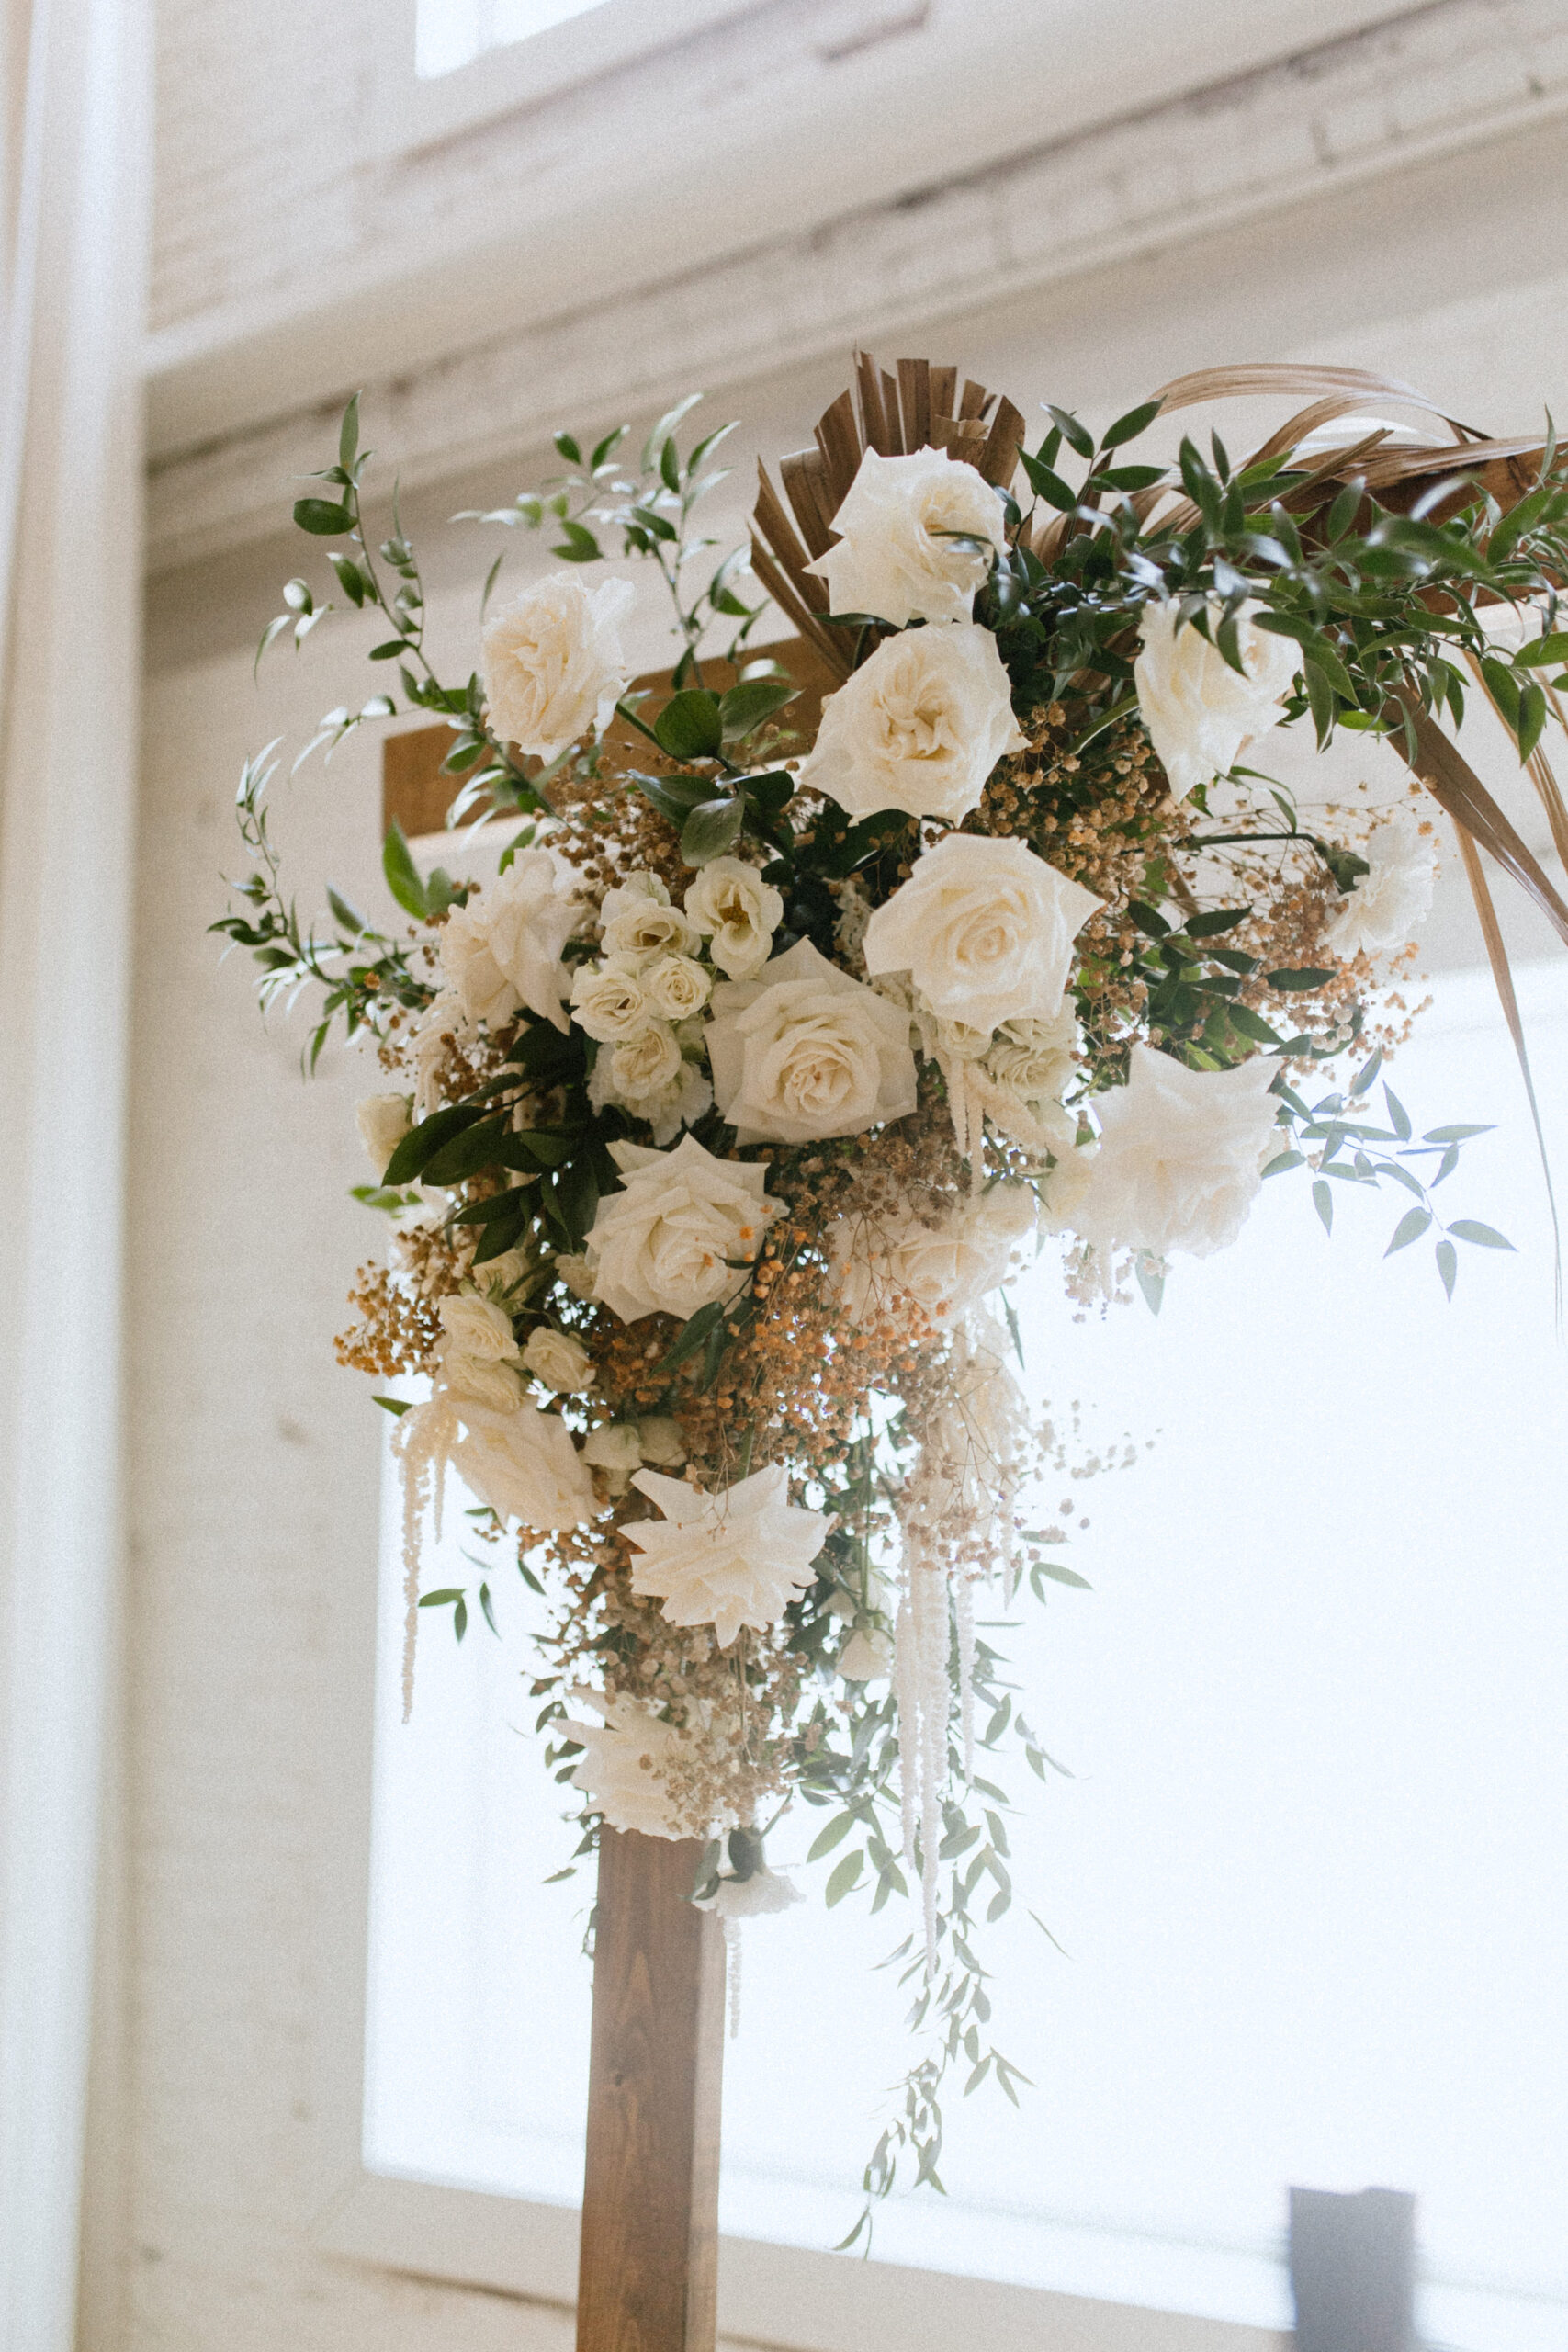 Elegant White and Cream Ceremony Florals with Greenery on Wooden Wedding Arch Inspiration